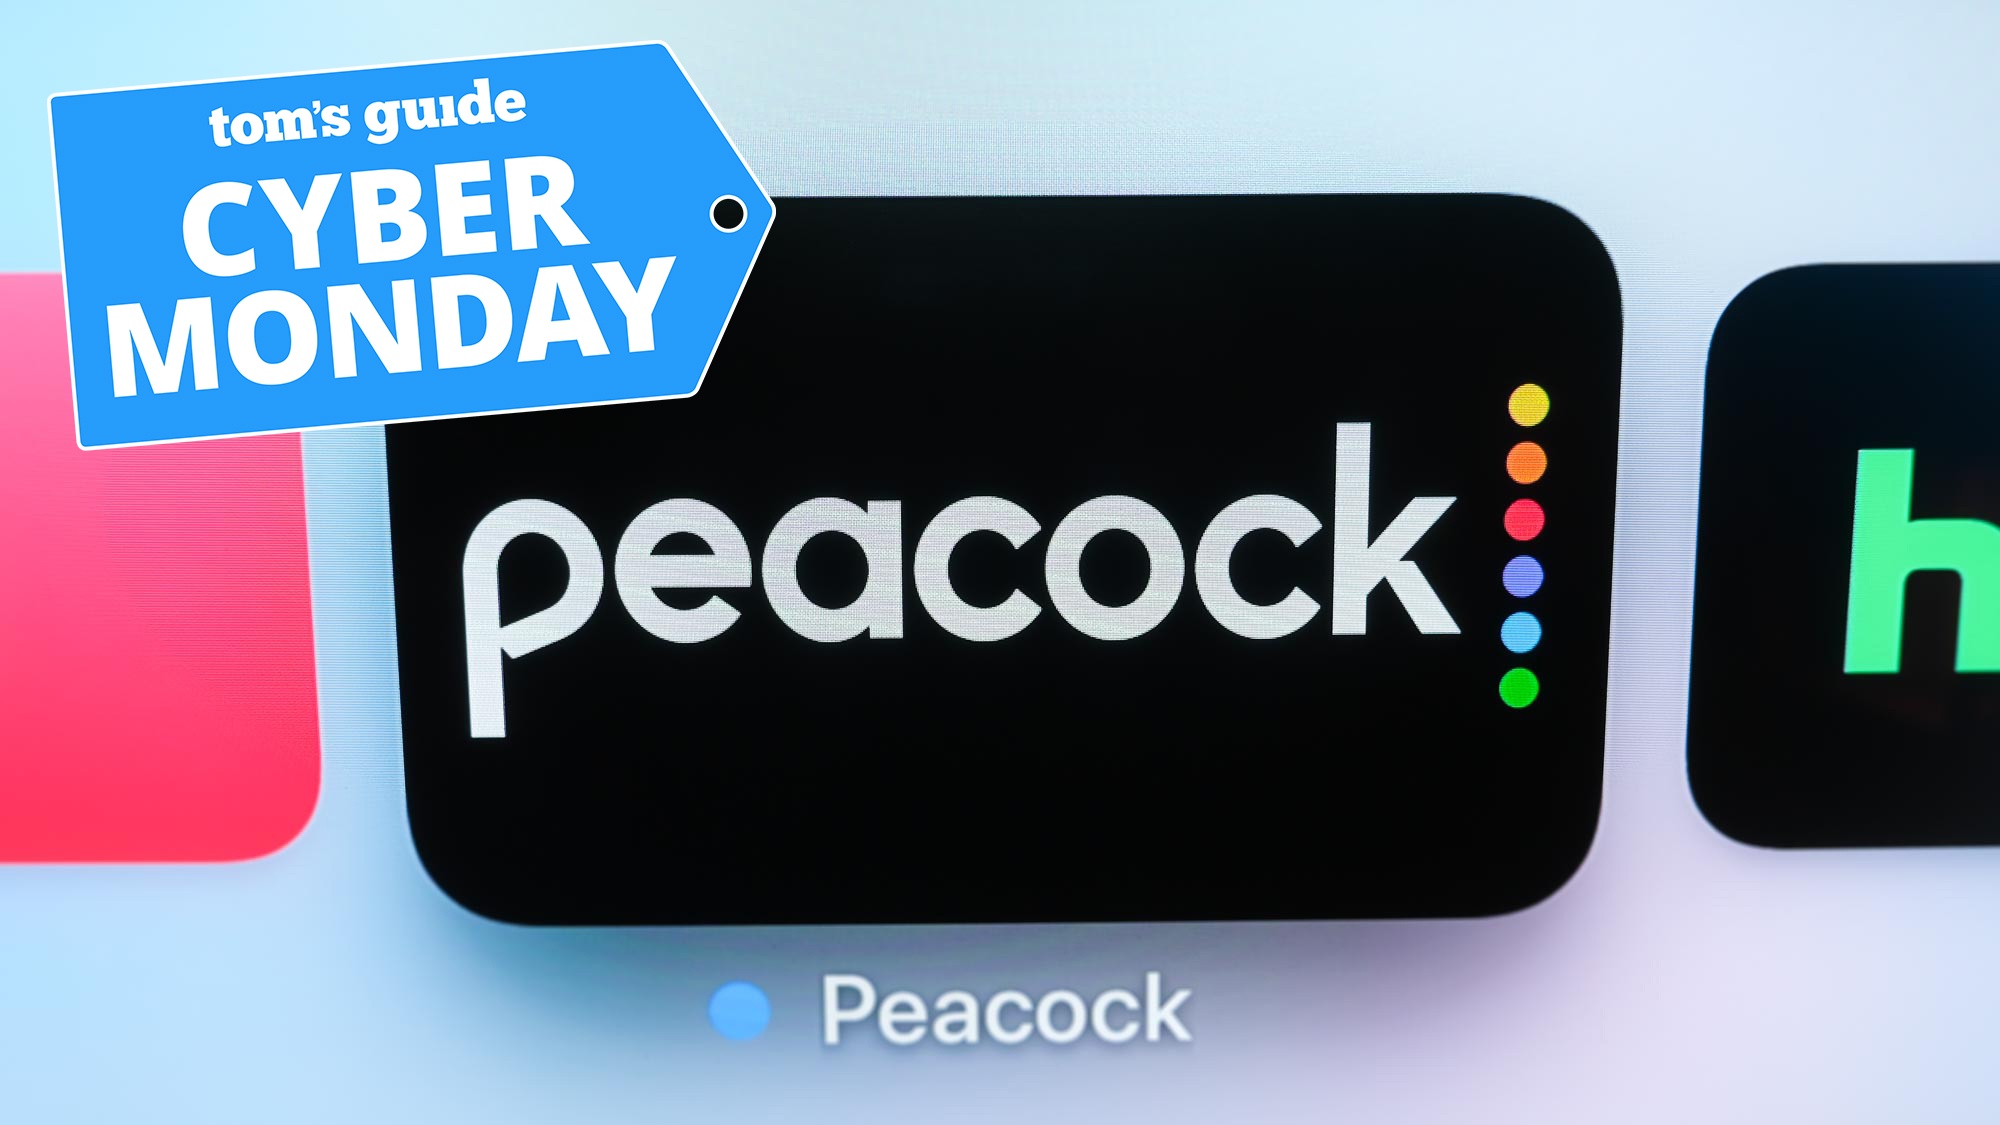 The Peacock app on Apple tvOS with a Tom's Guide Cyber Monday sticker in the top right corner